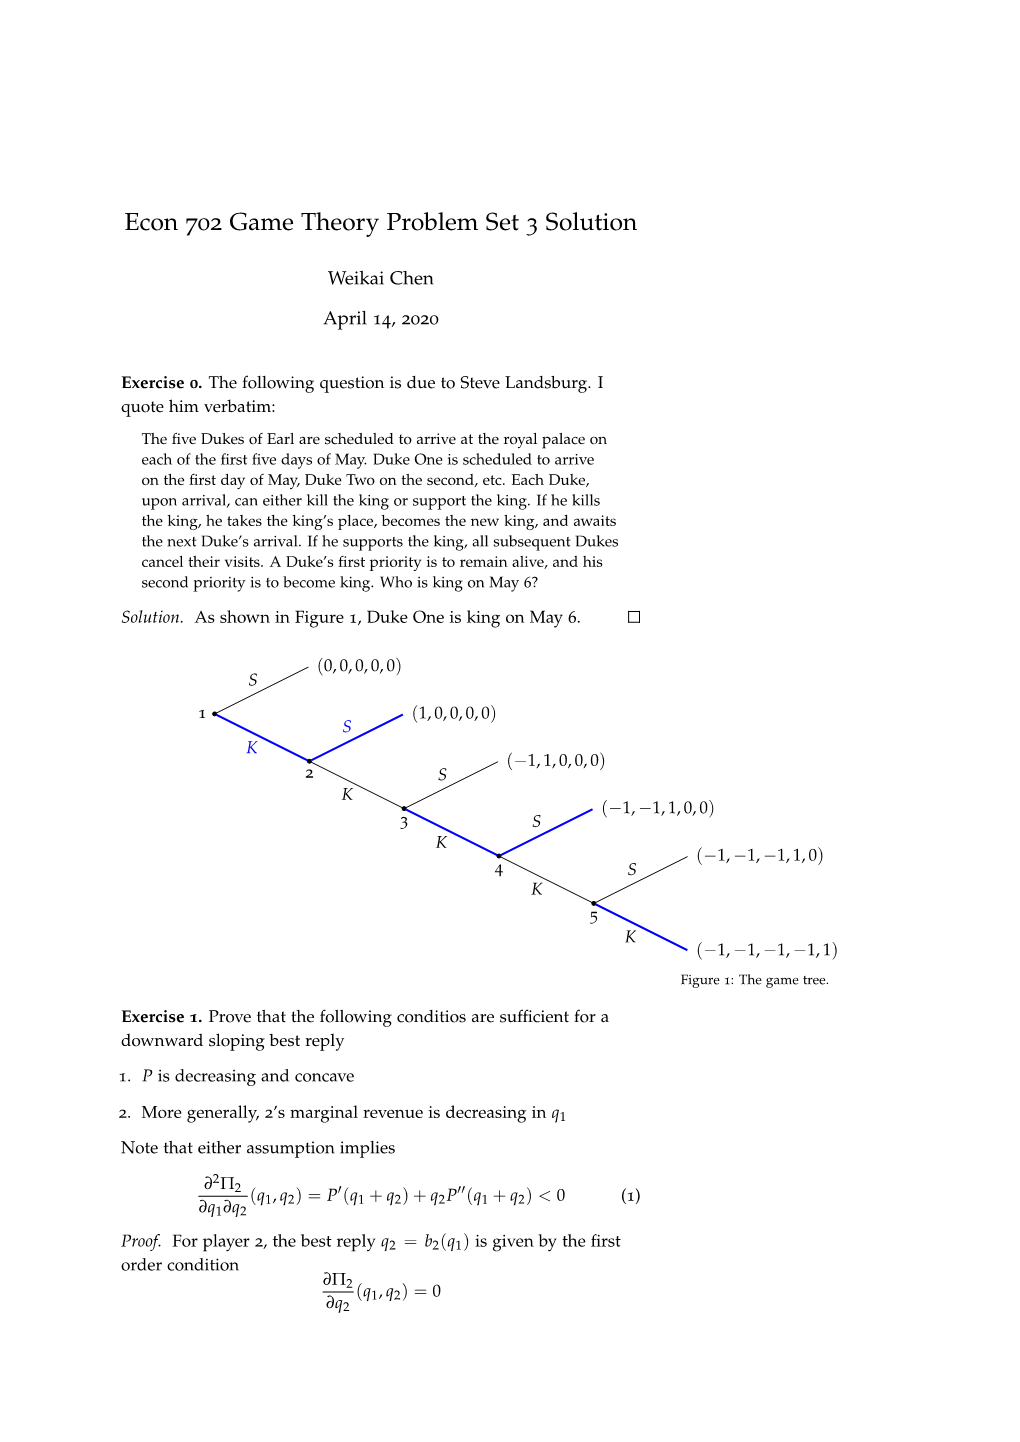 Econ 702 Game Theory Problem Set 3 Solution